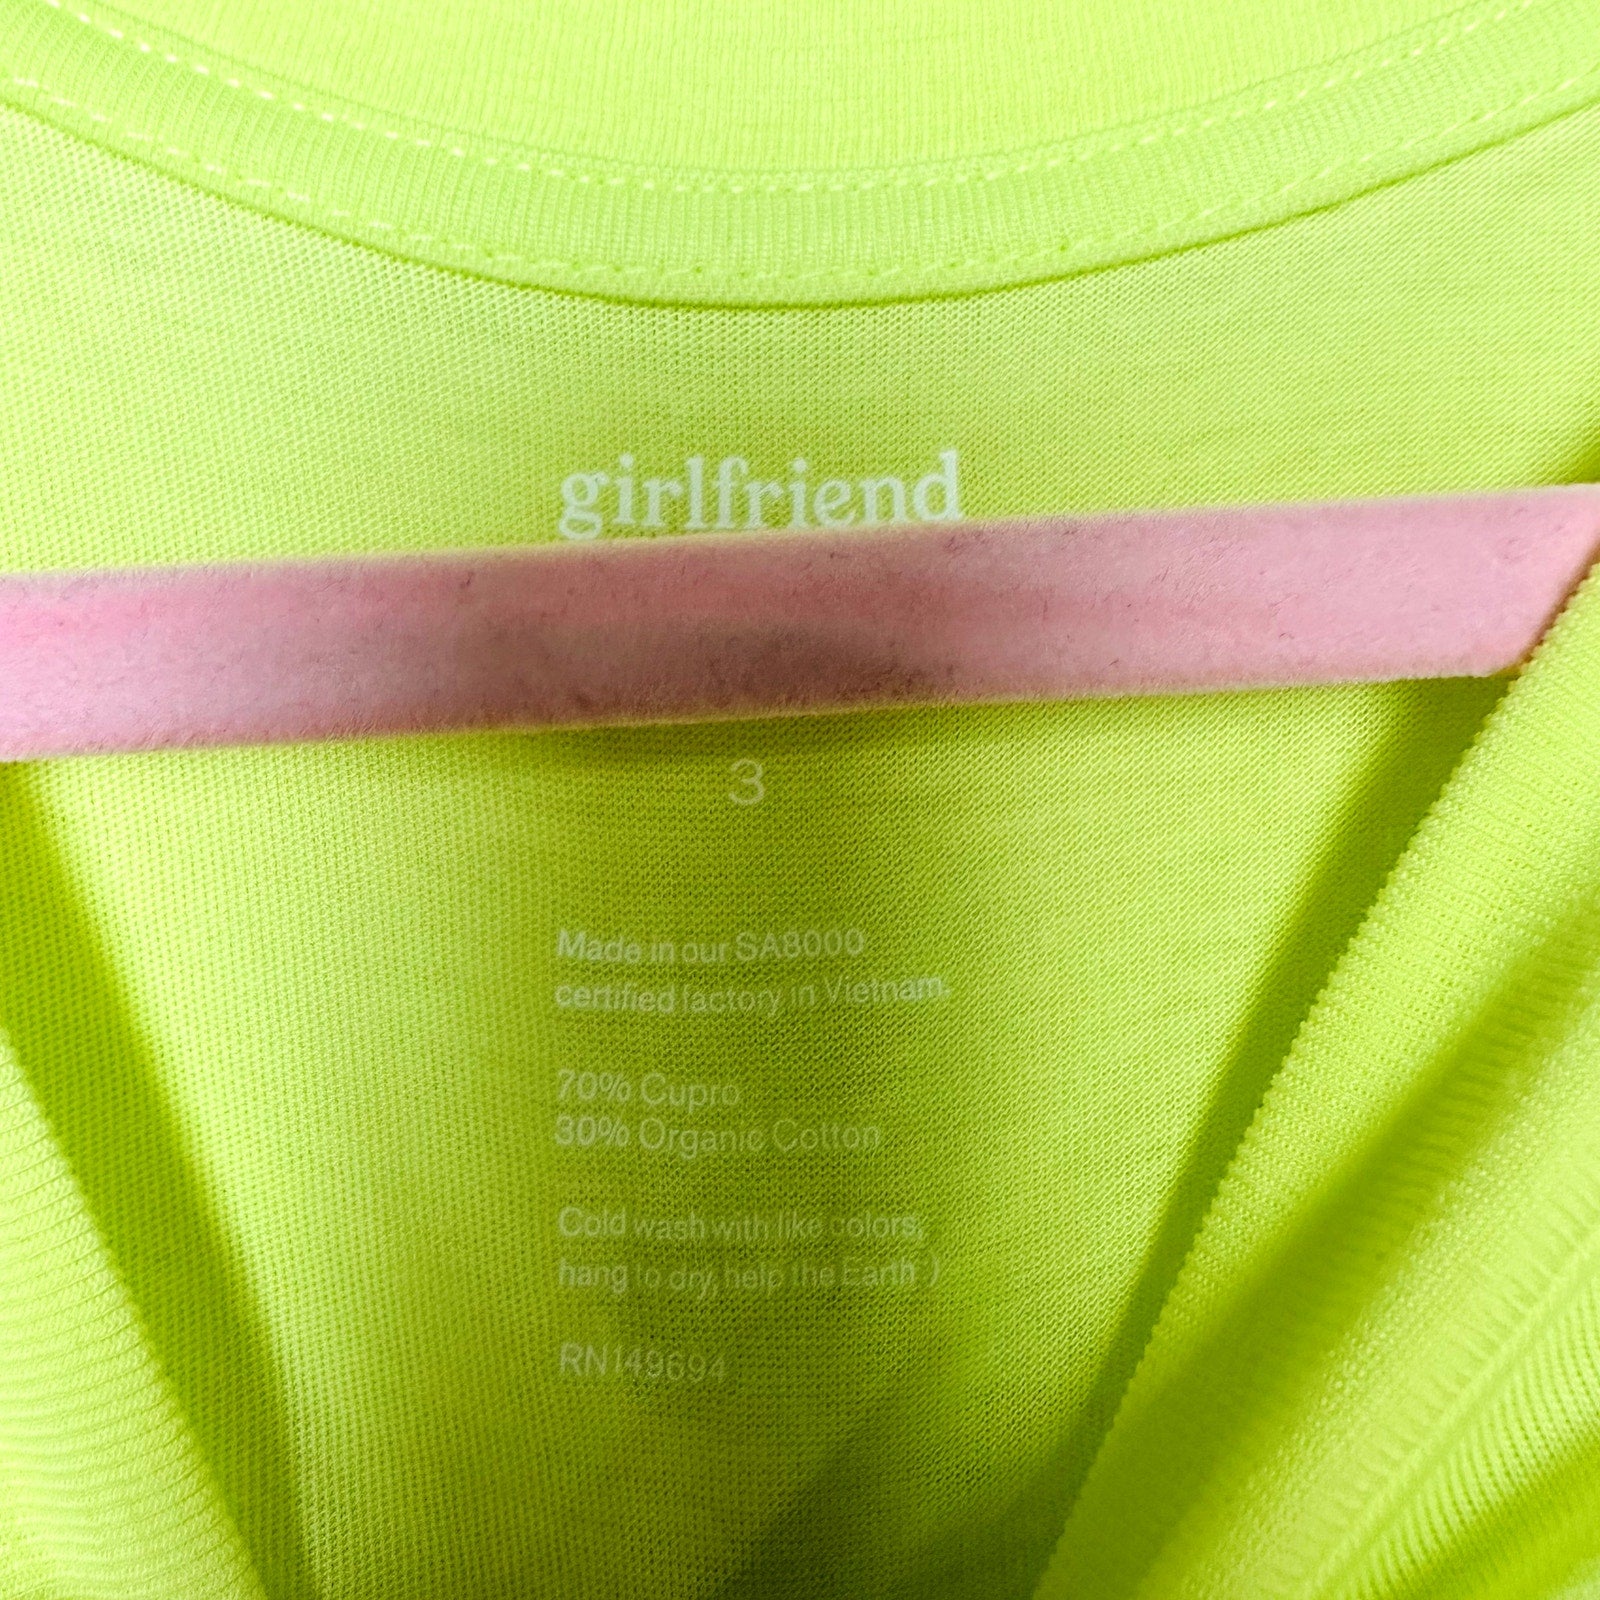 Girlfriend Collective NWT Unisex Crewneck T-Shirt Top Electric Lime Size 3